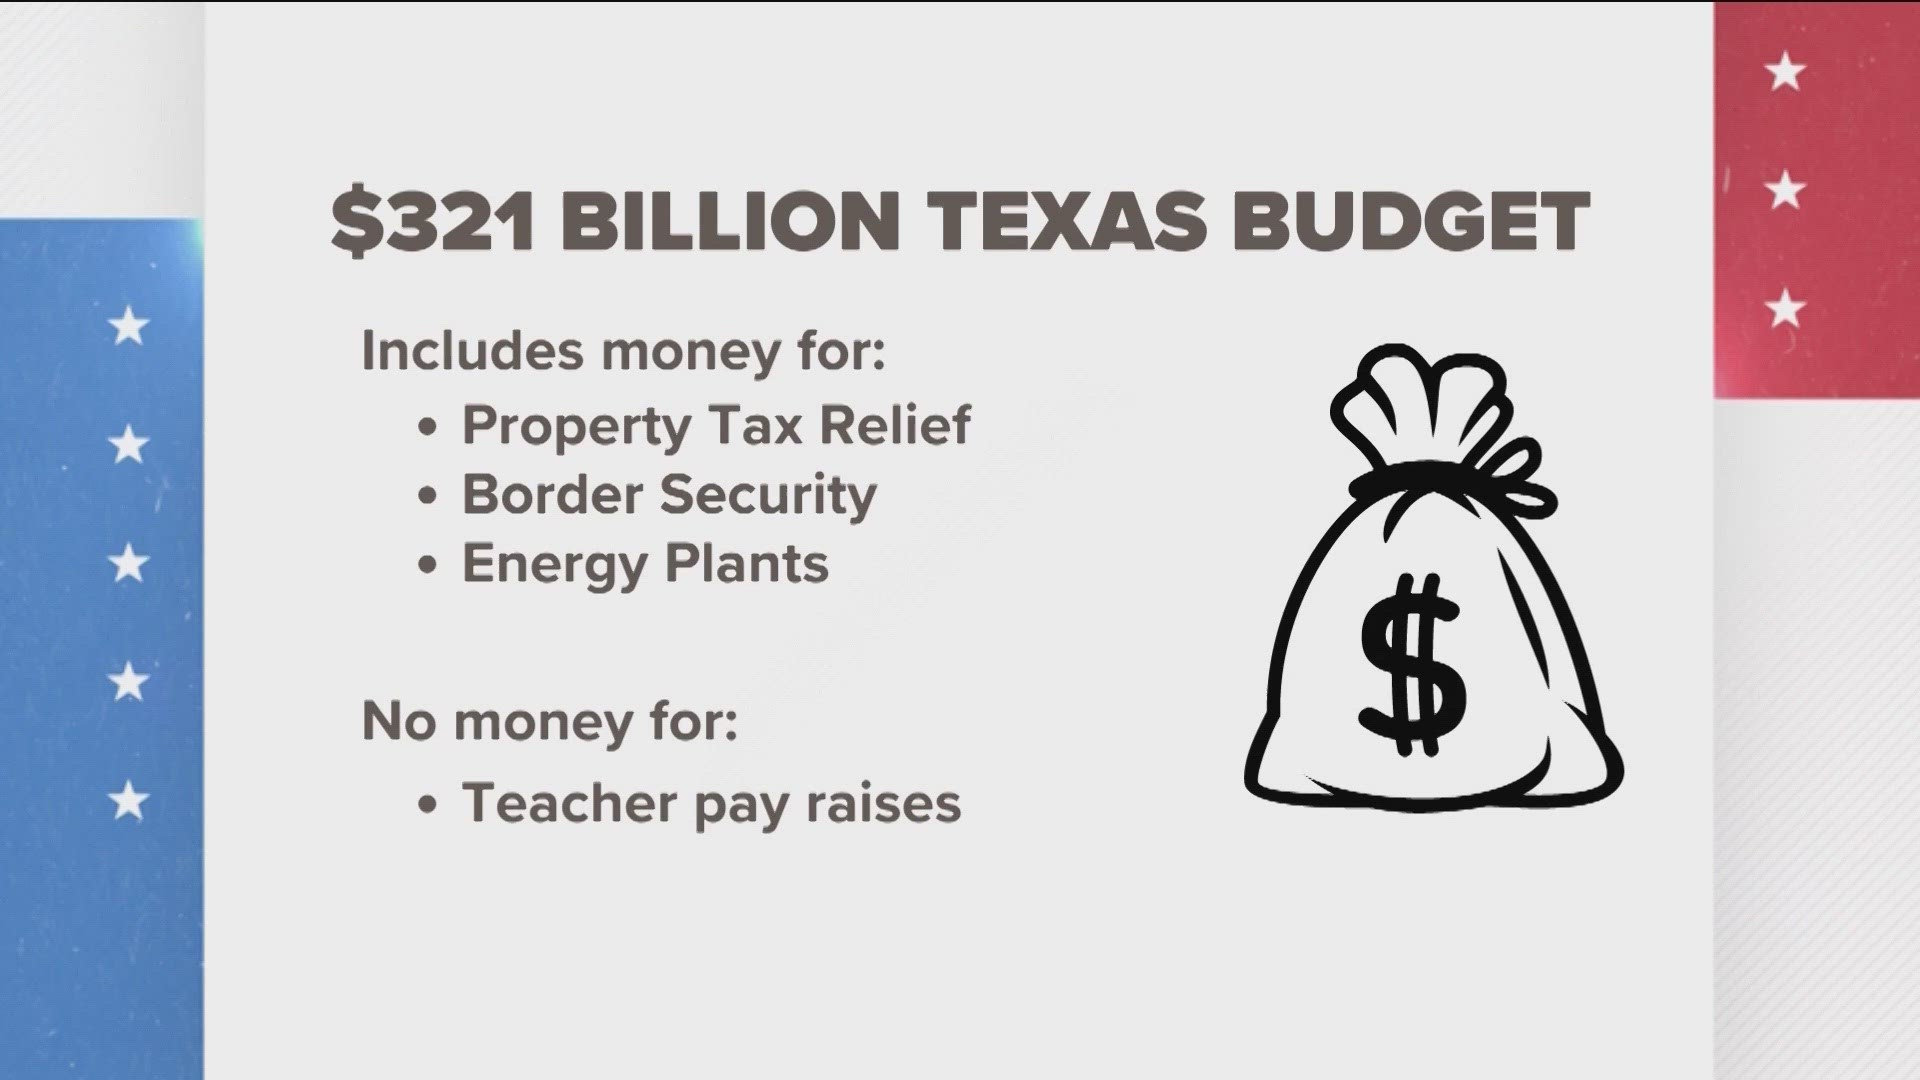 Late Saturday night, the House passed the state budget. Here is what's in it.